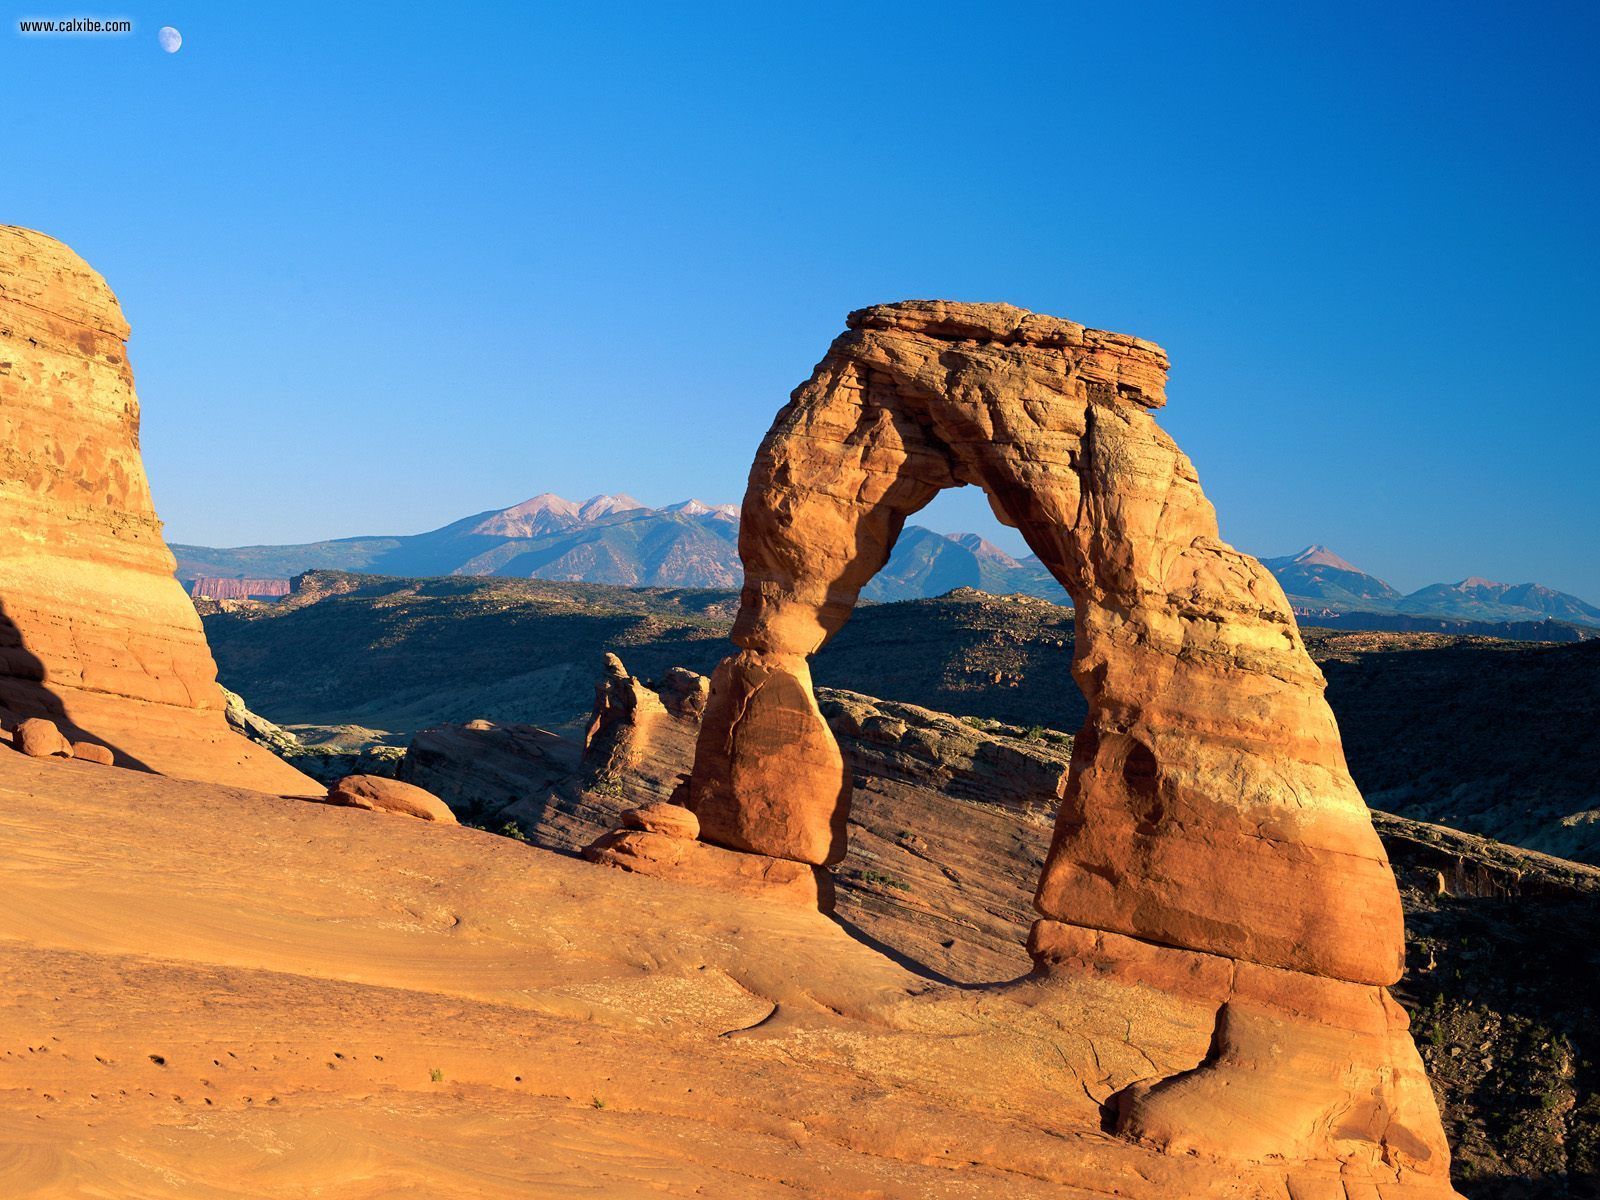 Nature: Delicate Arch Arches National Park Utah, picture nr. 21346